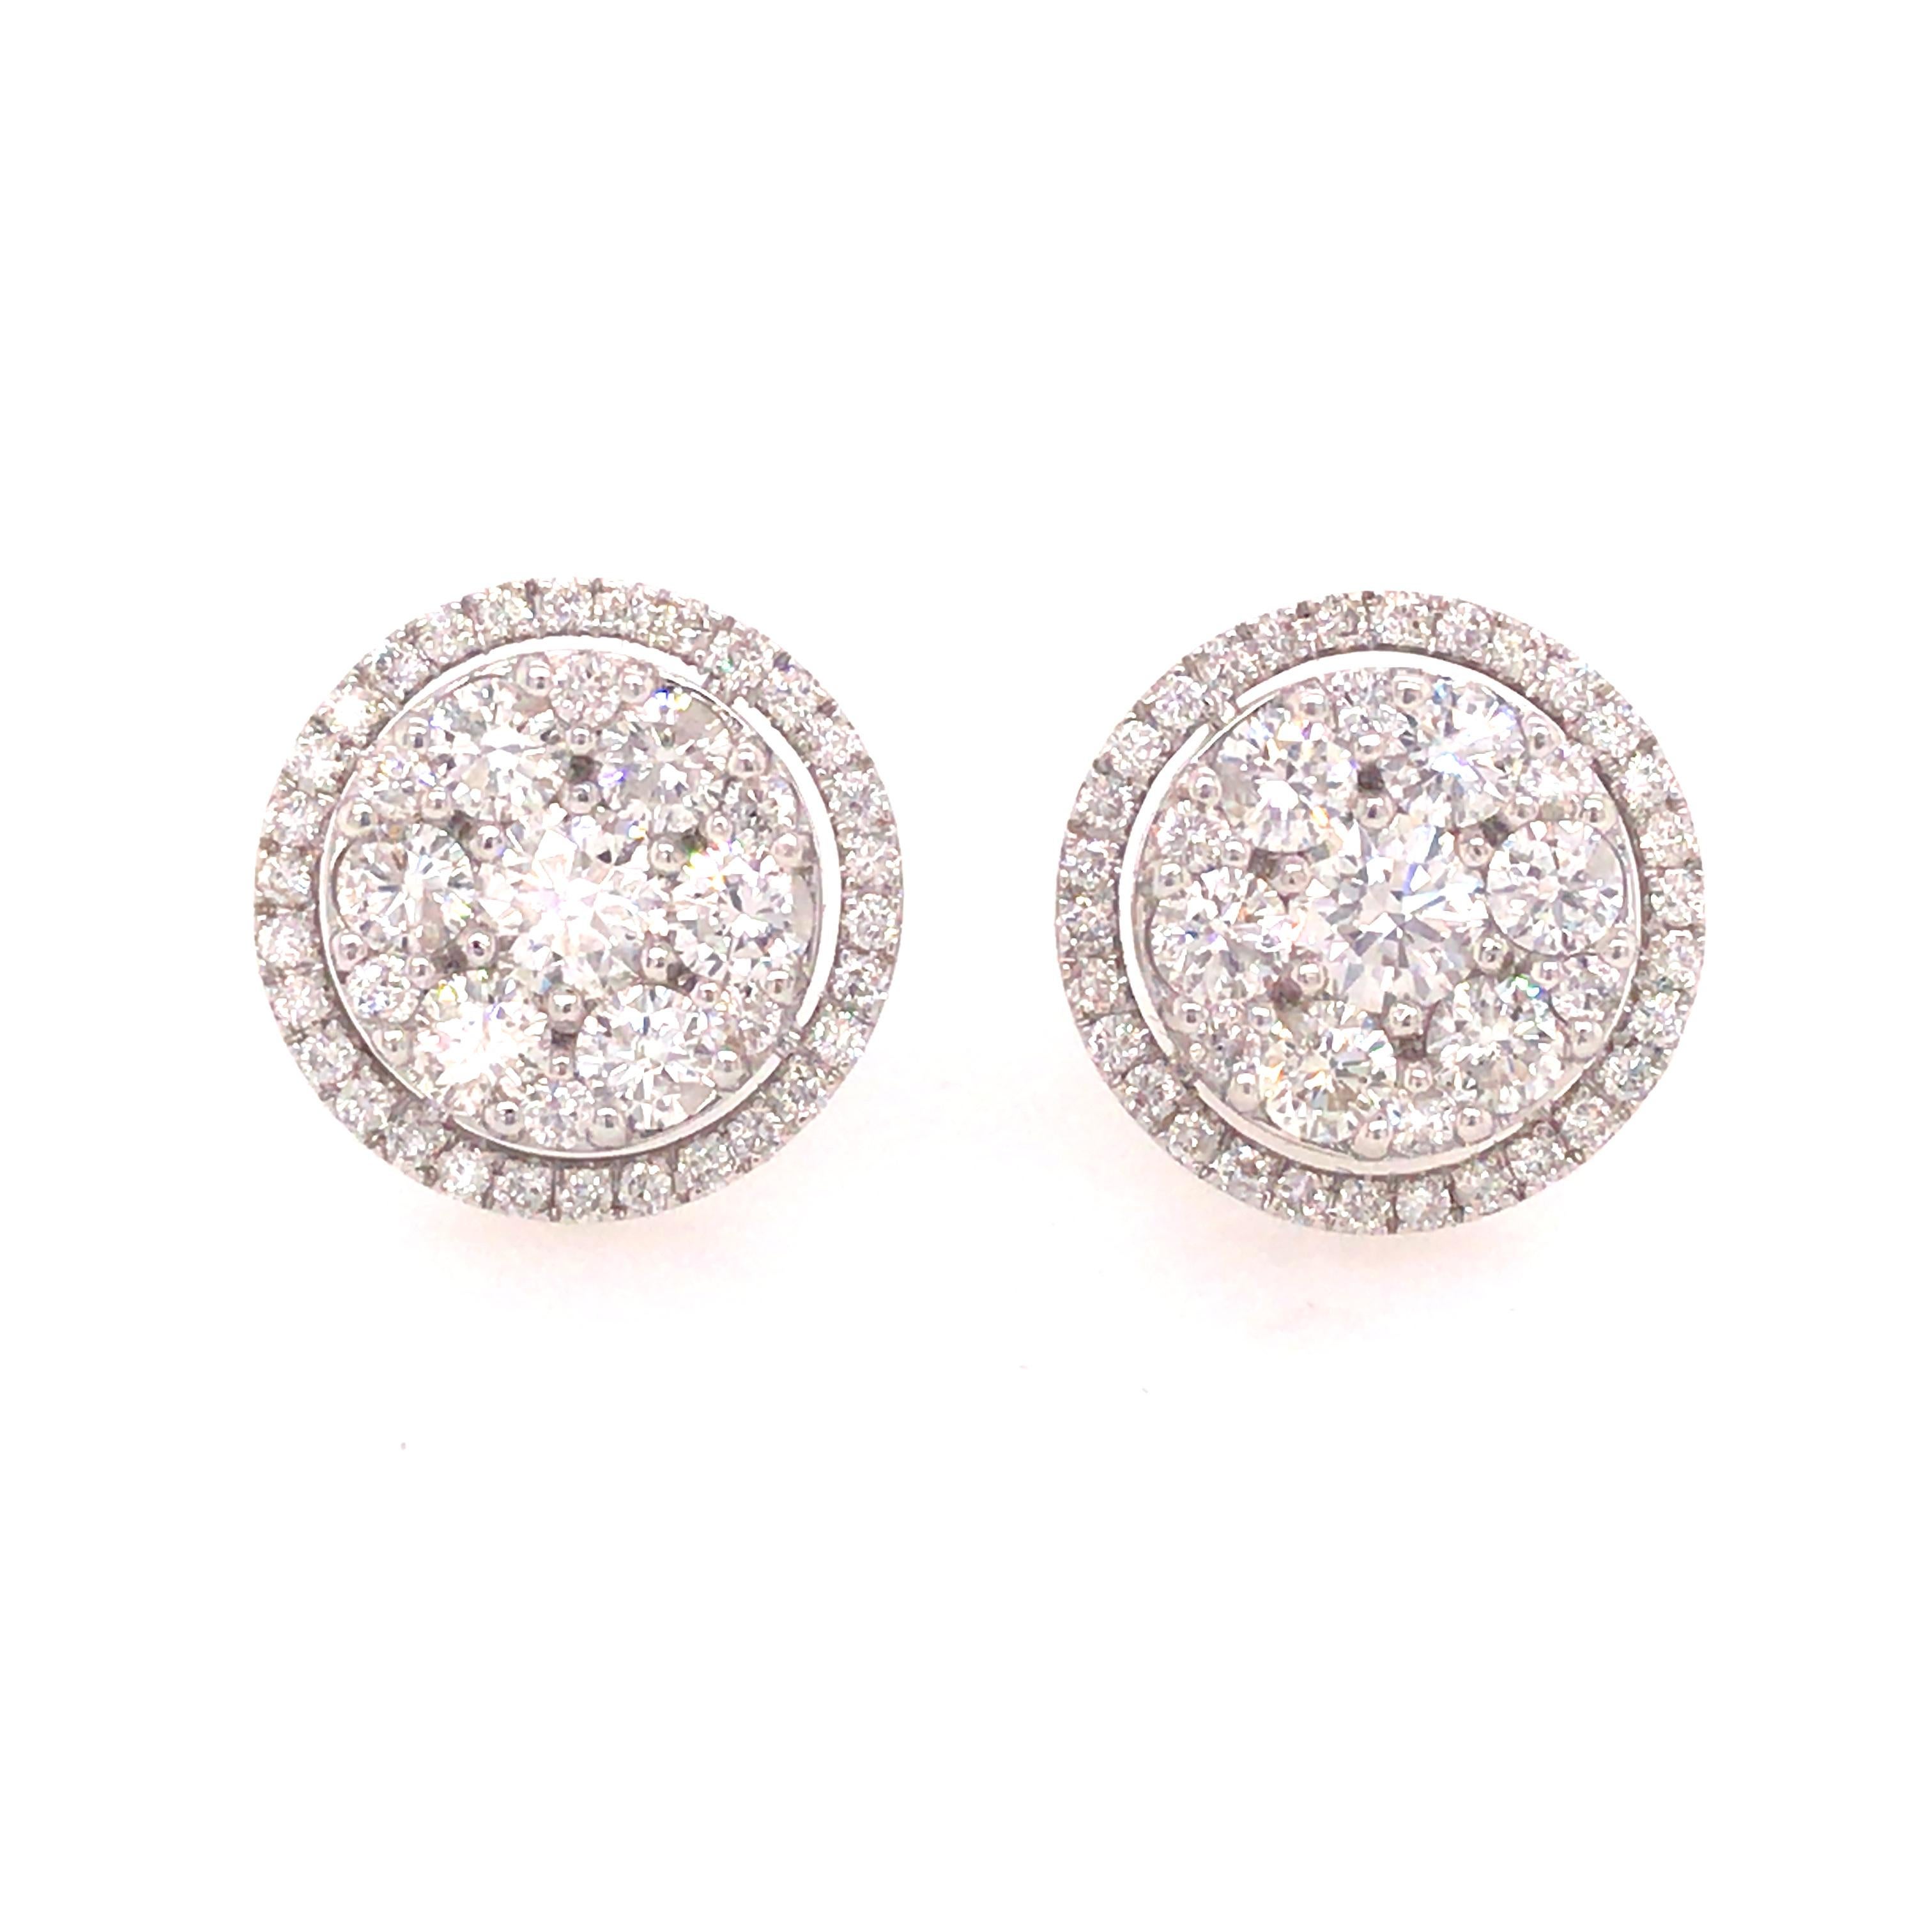 Diamond Cluster Earrings in 18K White Gold.  (86) Round Brilliant Cut Diamonds weighing 2.51 carat total weight, G-H in color and VS-SI in clarity are expertly set.  The Earrings measure 1/2 inch in diameter.  5.88 grams.